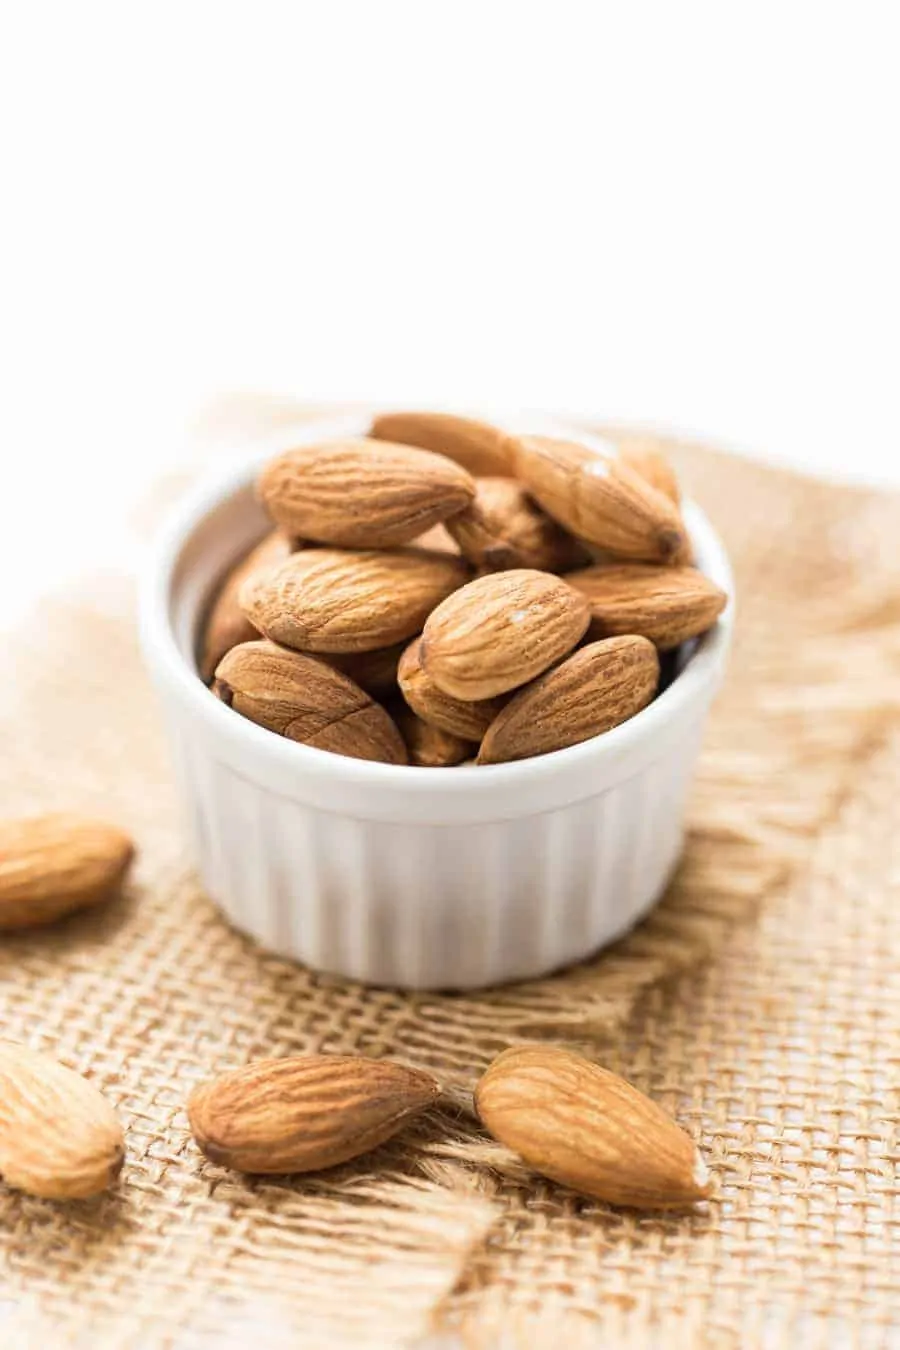 The BEST whole almonds come from Bob's Red Mill!